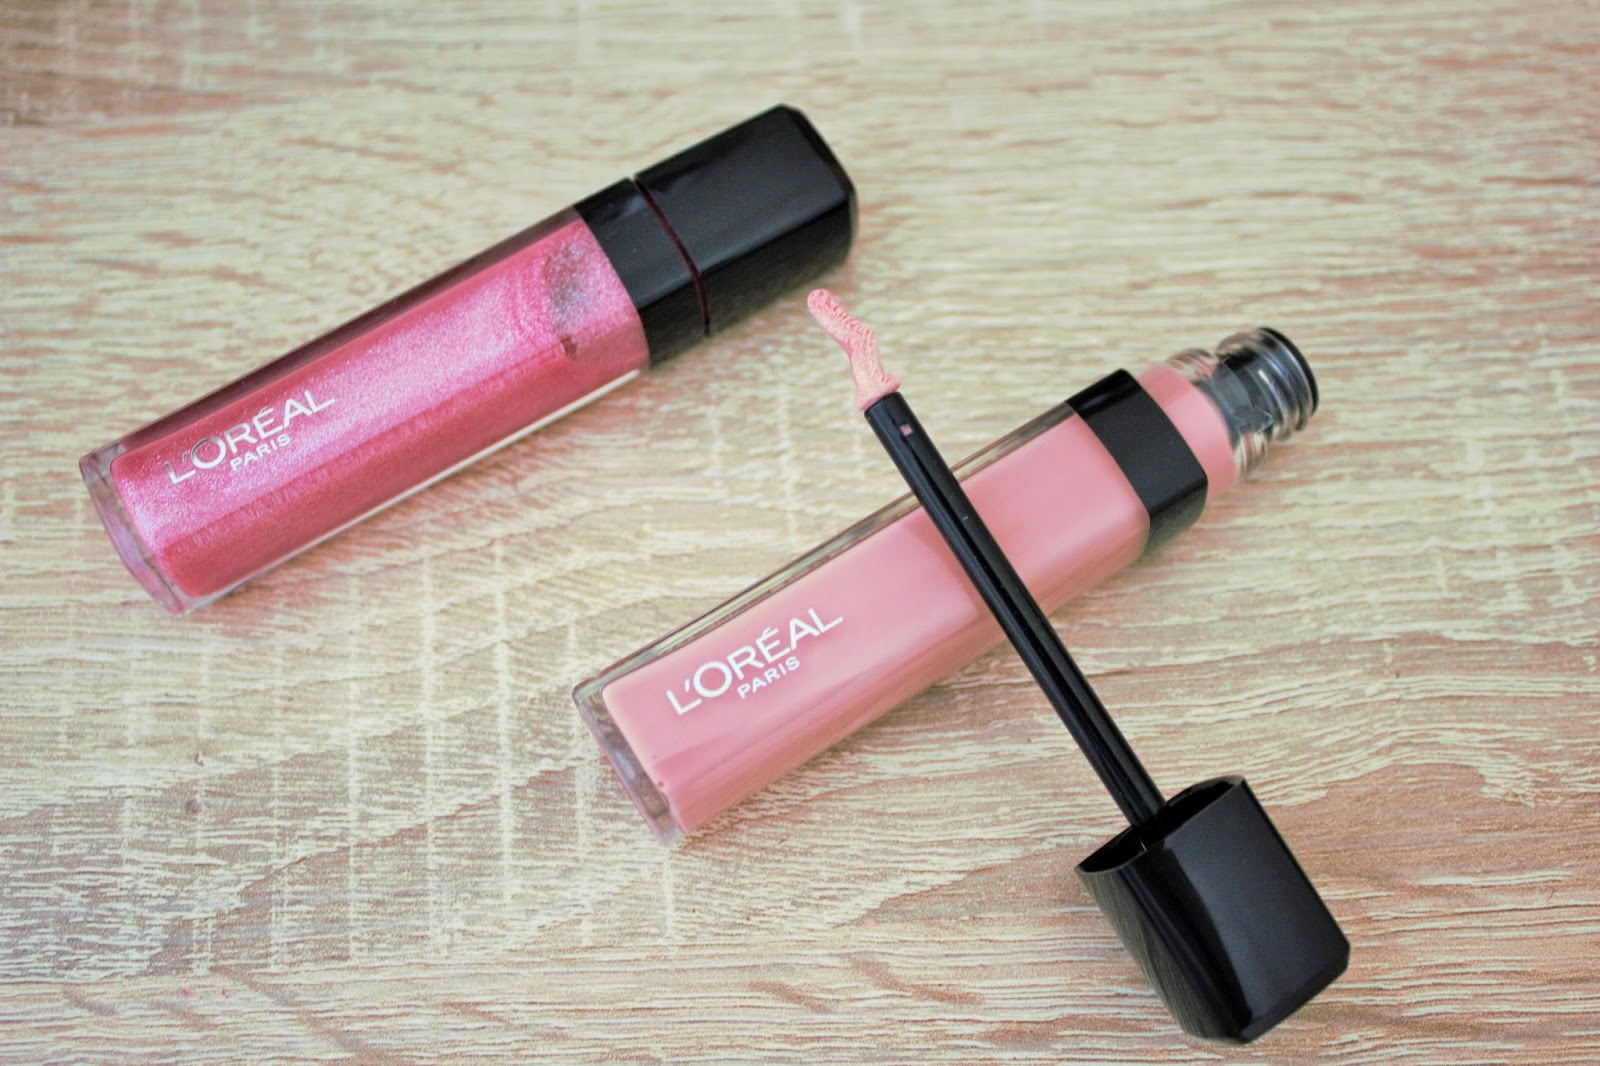 Applicator - L'Oreal Infallible Mega Gloss in 103 Protest Queen and 509 You Know You Love Me